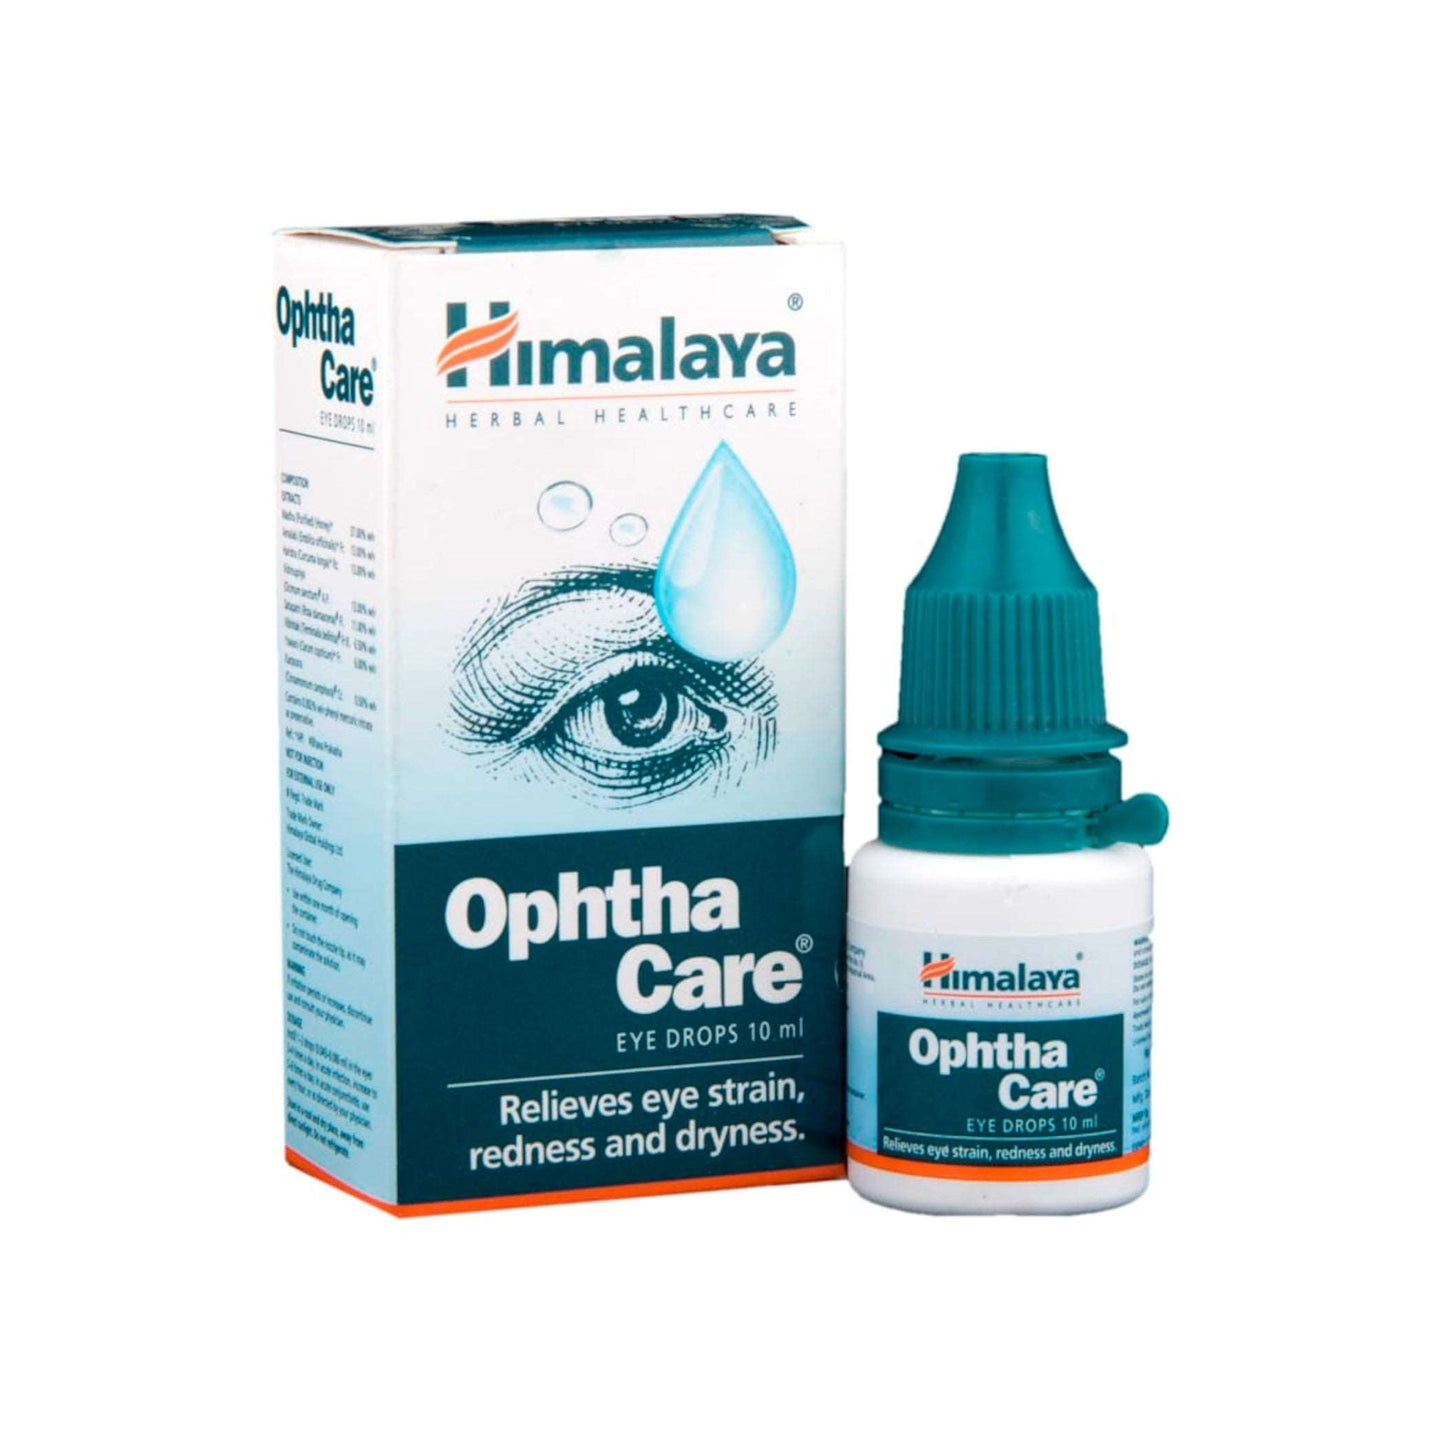 Image: Himalaya Herbals Ophthacare Eye Drops 10 ml: Soothing relief for eye irritations, inflammation, and eye strain.